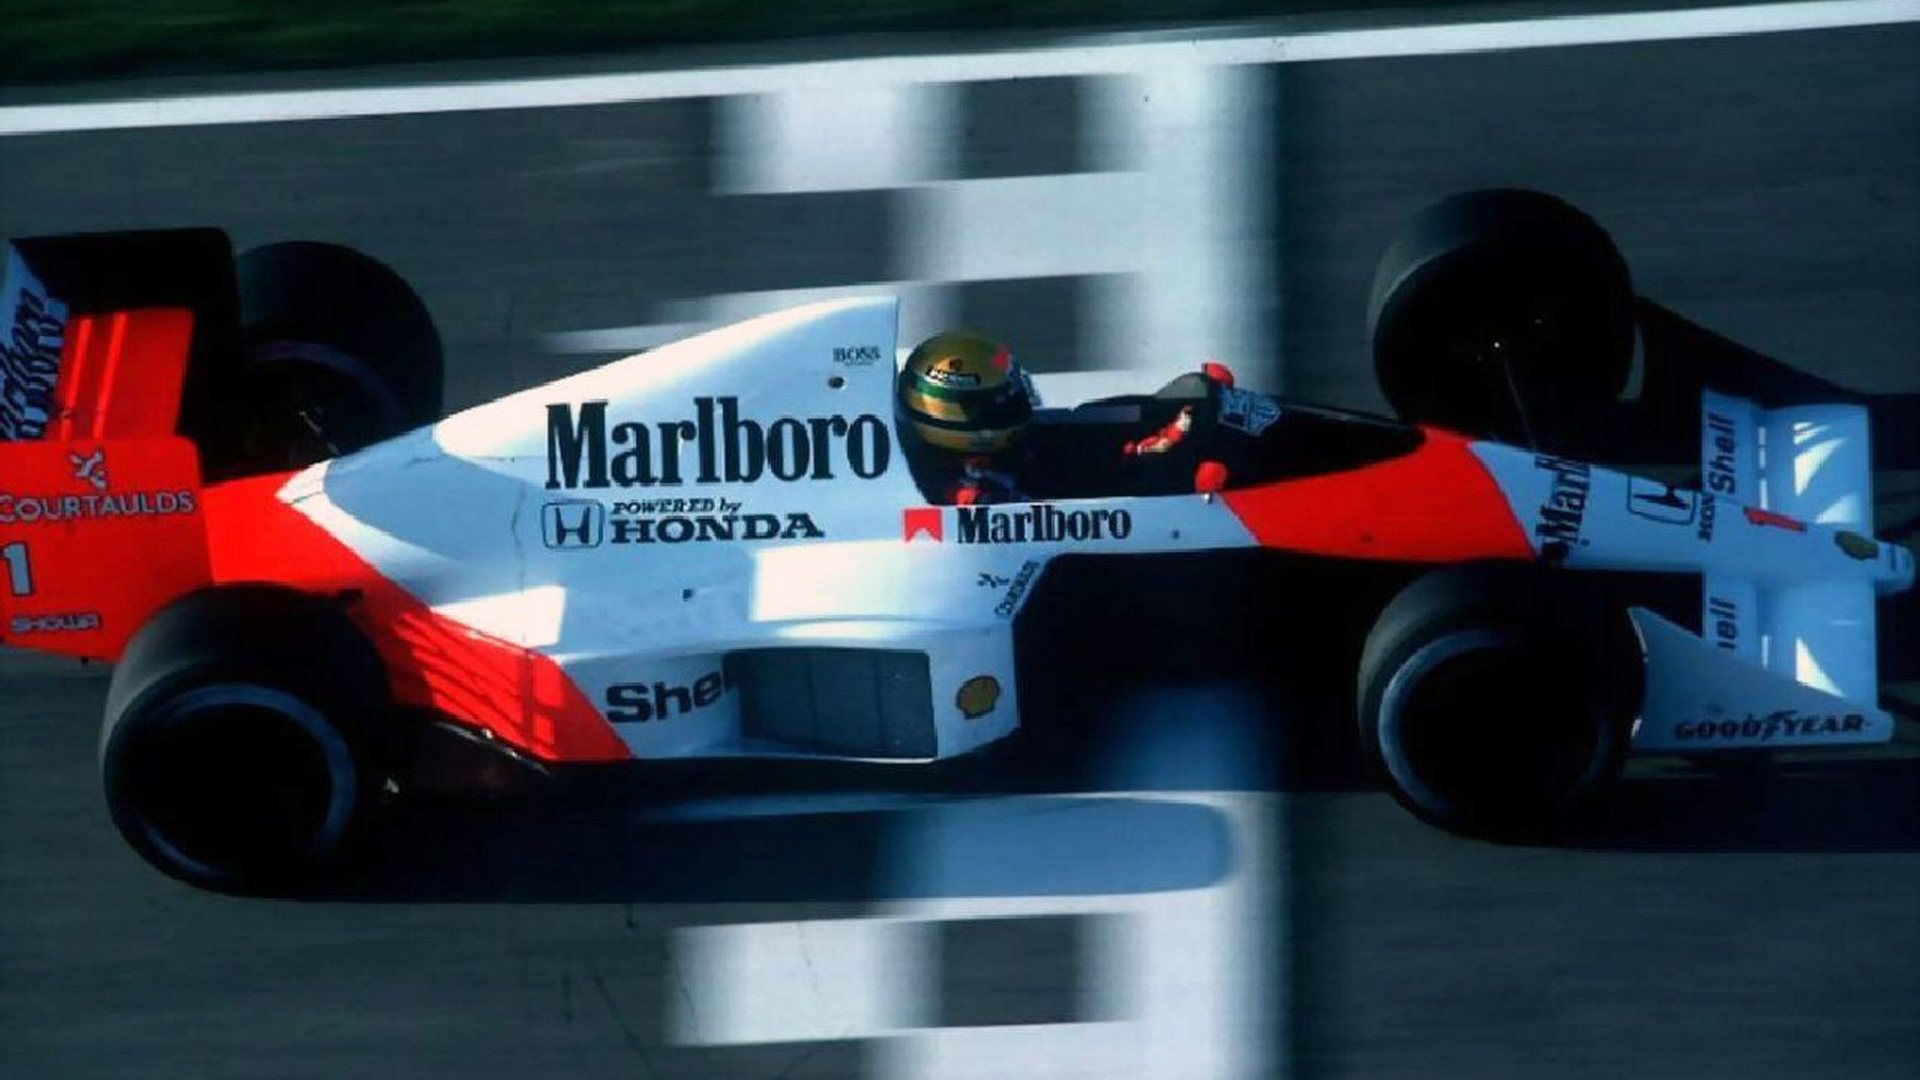 Wallpapers Ayrton Senna See More Info About S F Career On Our ...